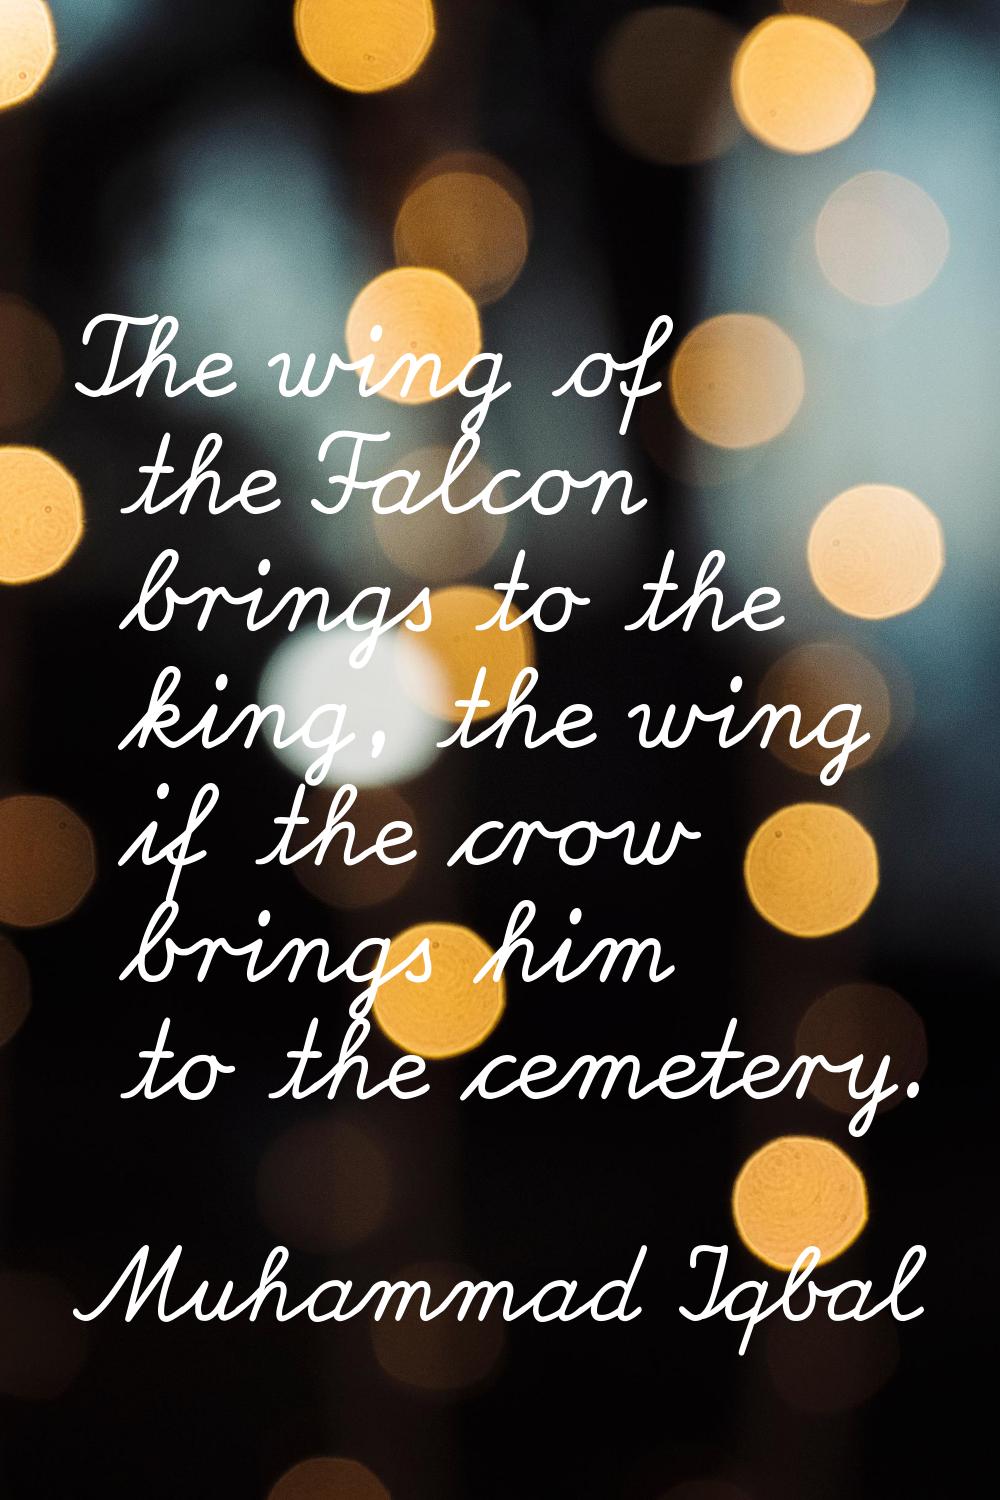 The wing of the Falcon brings to the king, the wing if the crow brings him to the cemetery.